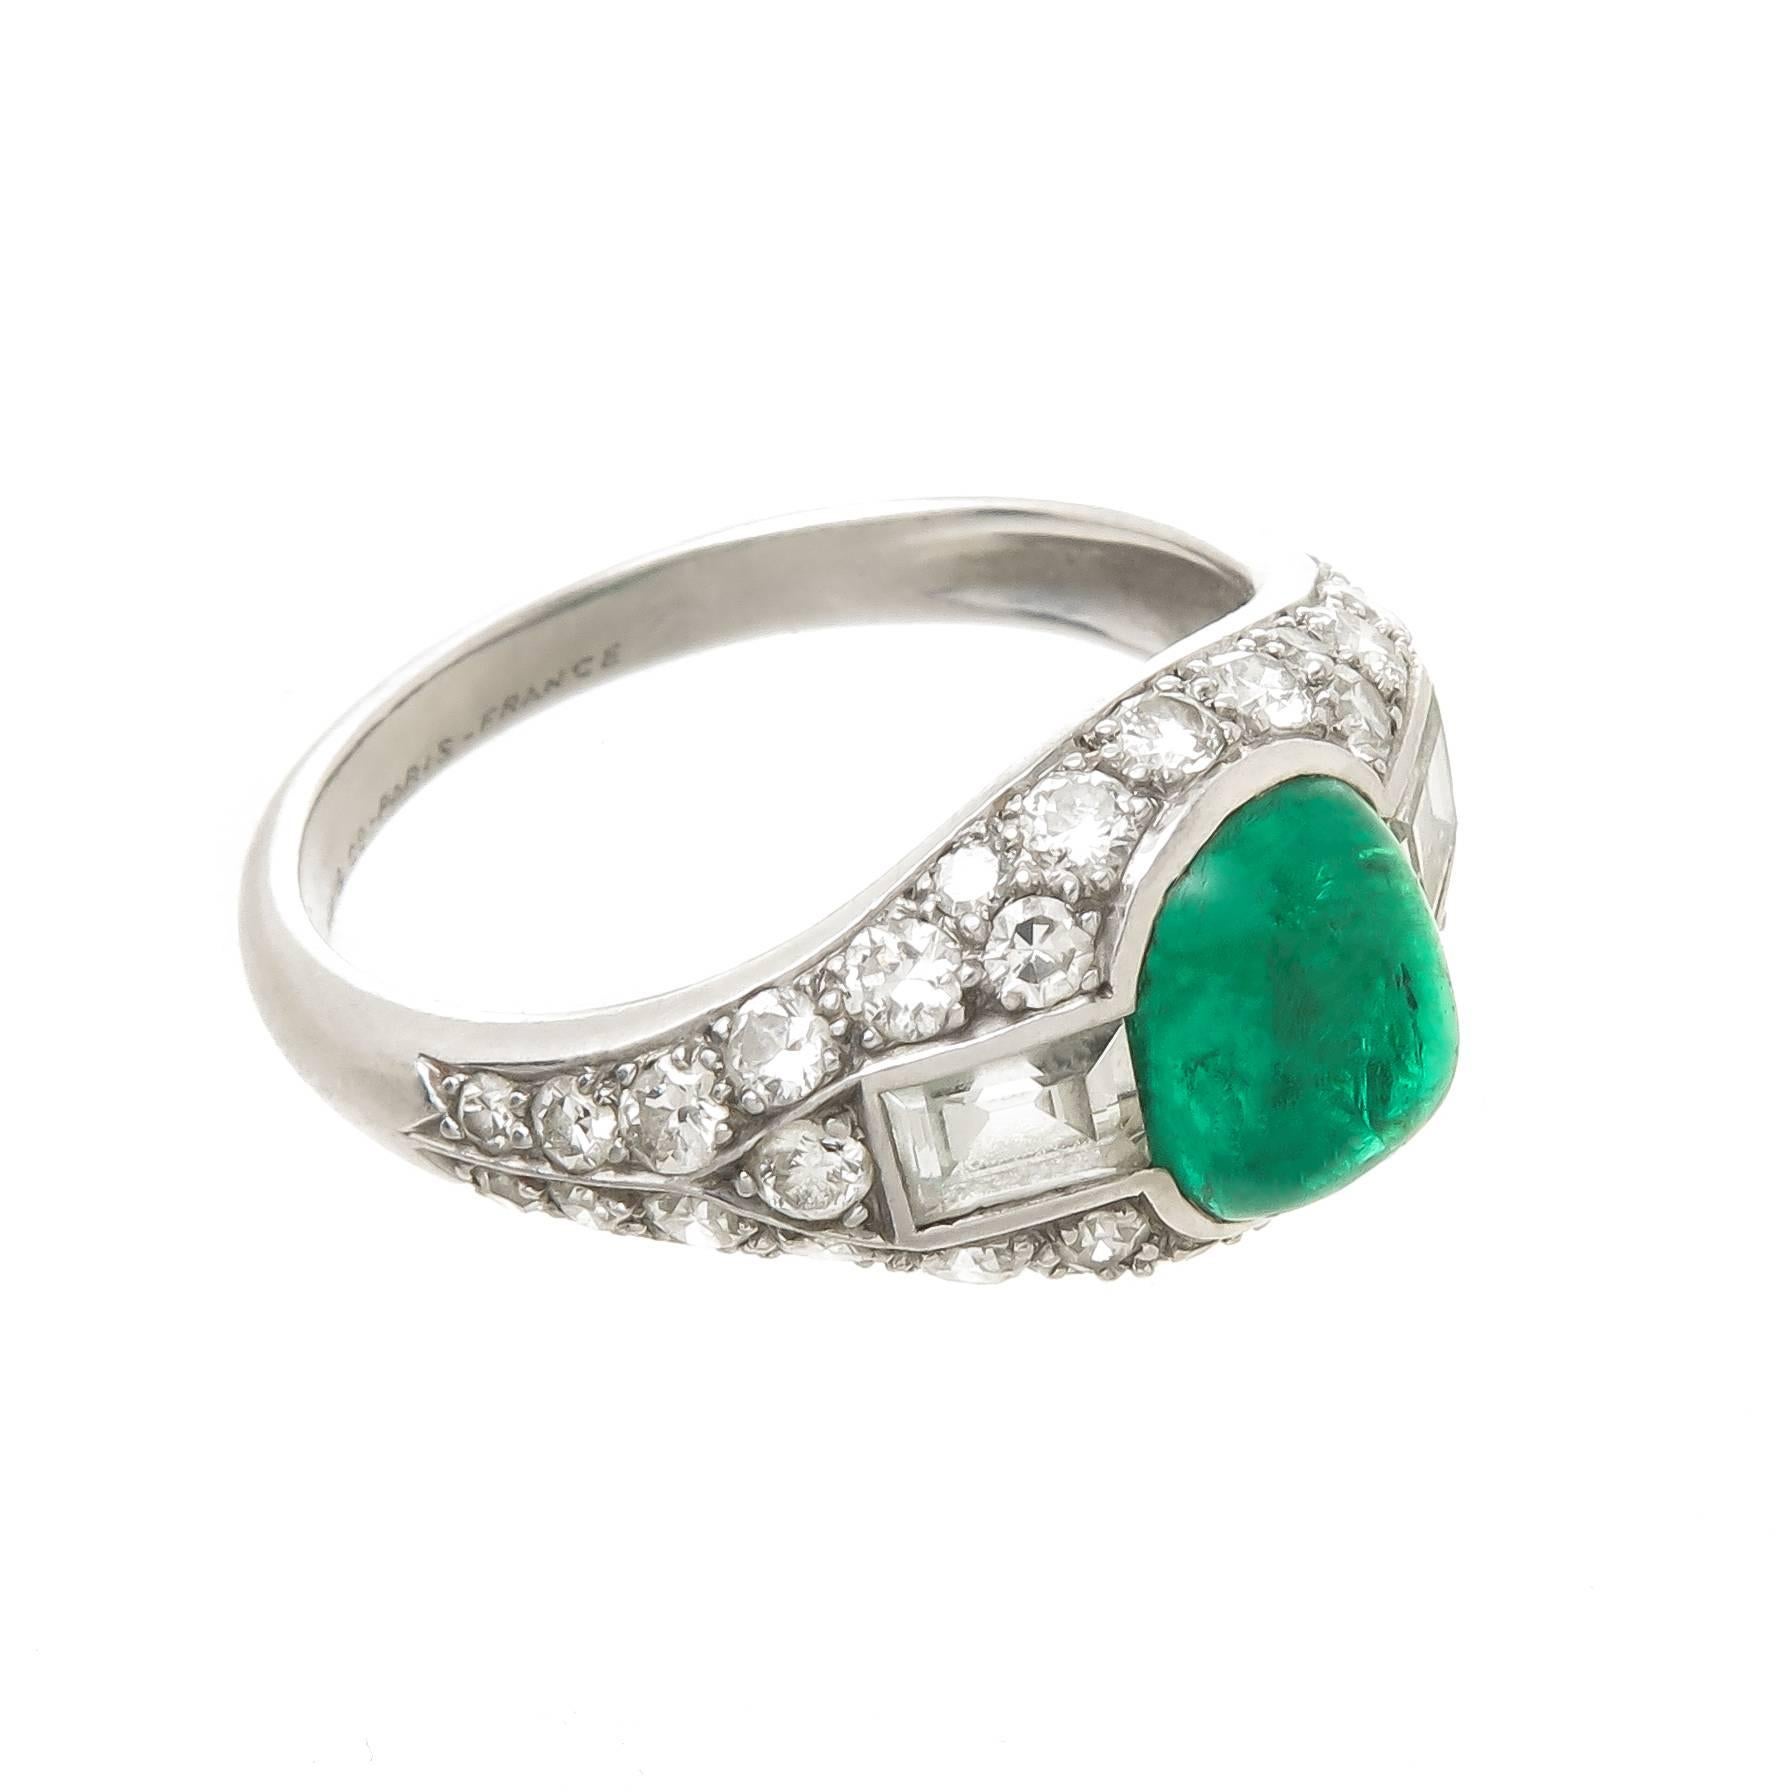 Circa 1925 Tiffany & Company Platinum Ring, retailed at the Tiffany & Company store in Paris. Centrally set with a Fine Color Sugar Loaf Cabochon Emerald measuring 7.6 x 6.5 x 5.10 approximately  2 carats. Further set with 2 stepped cut and numerous